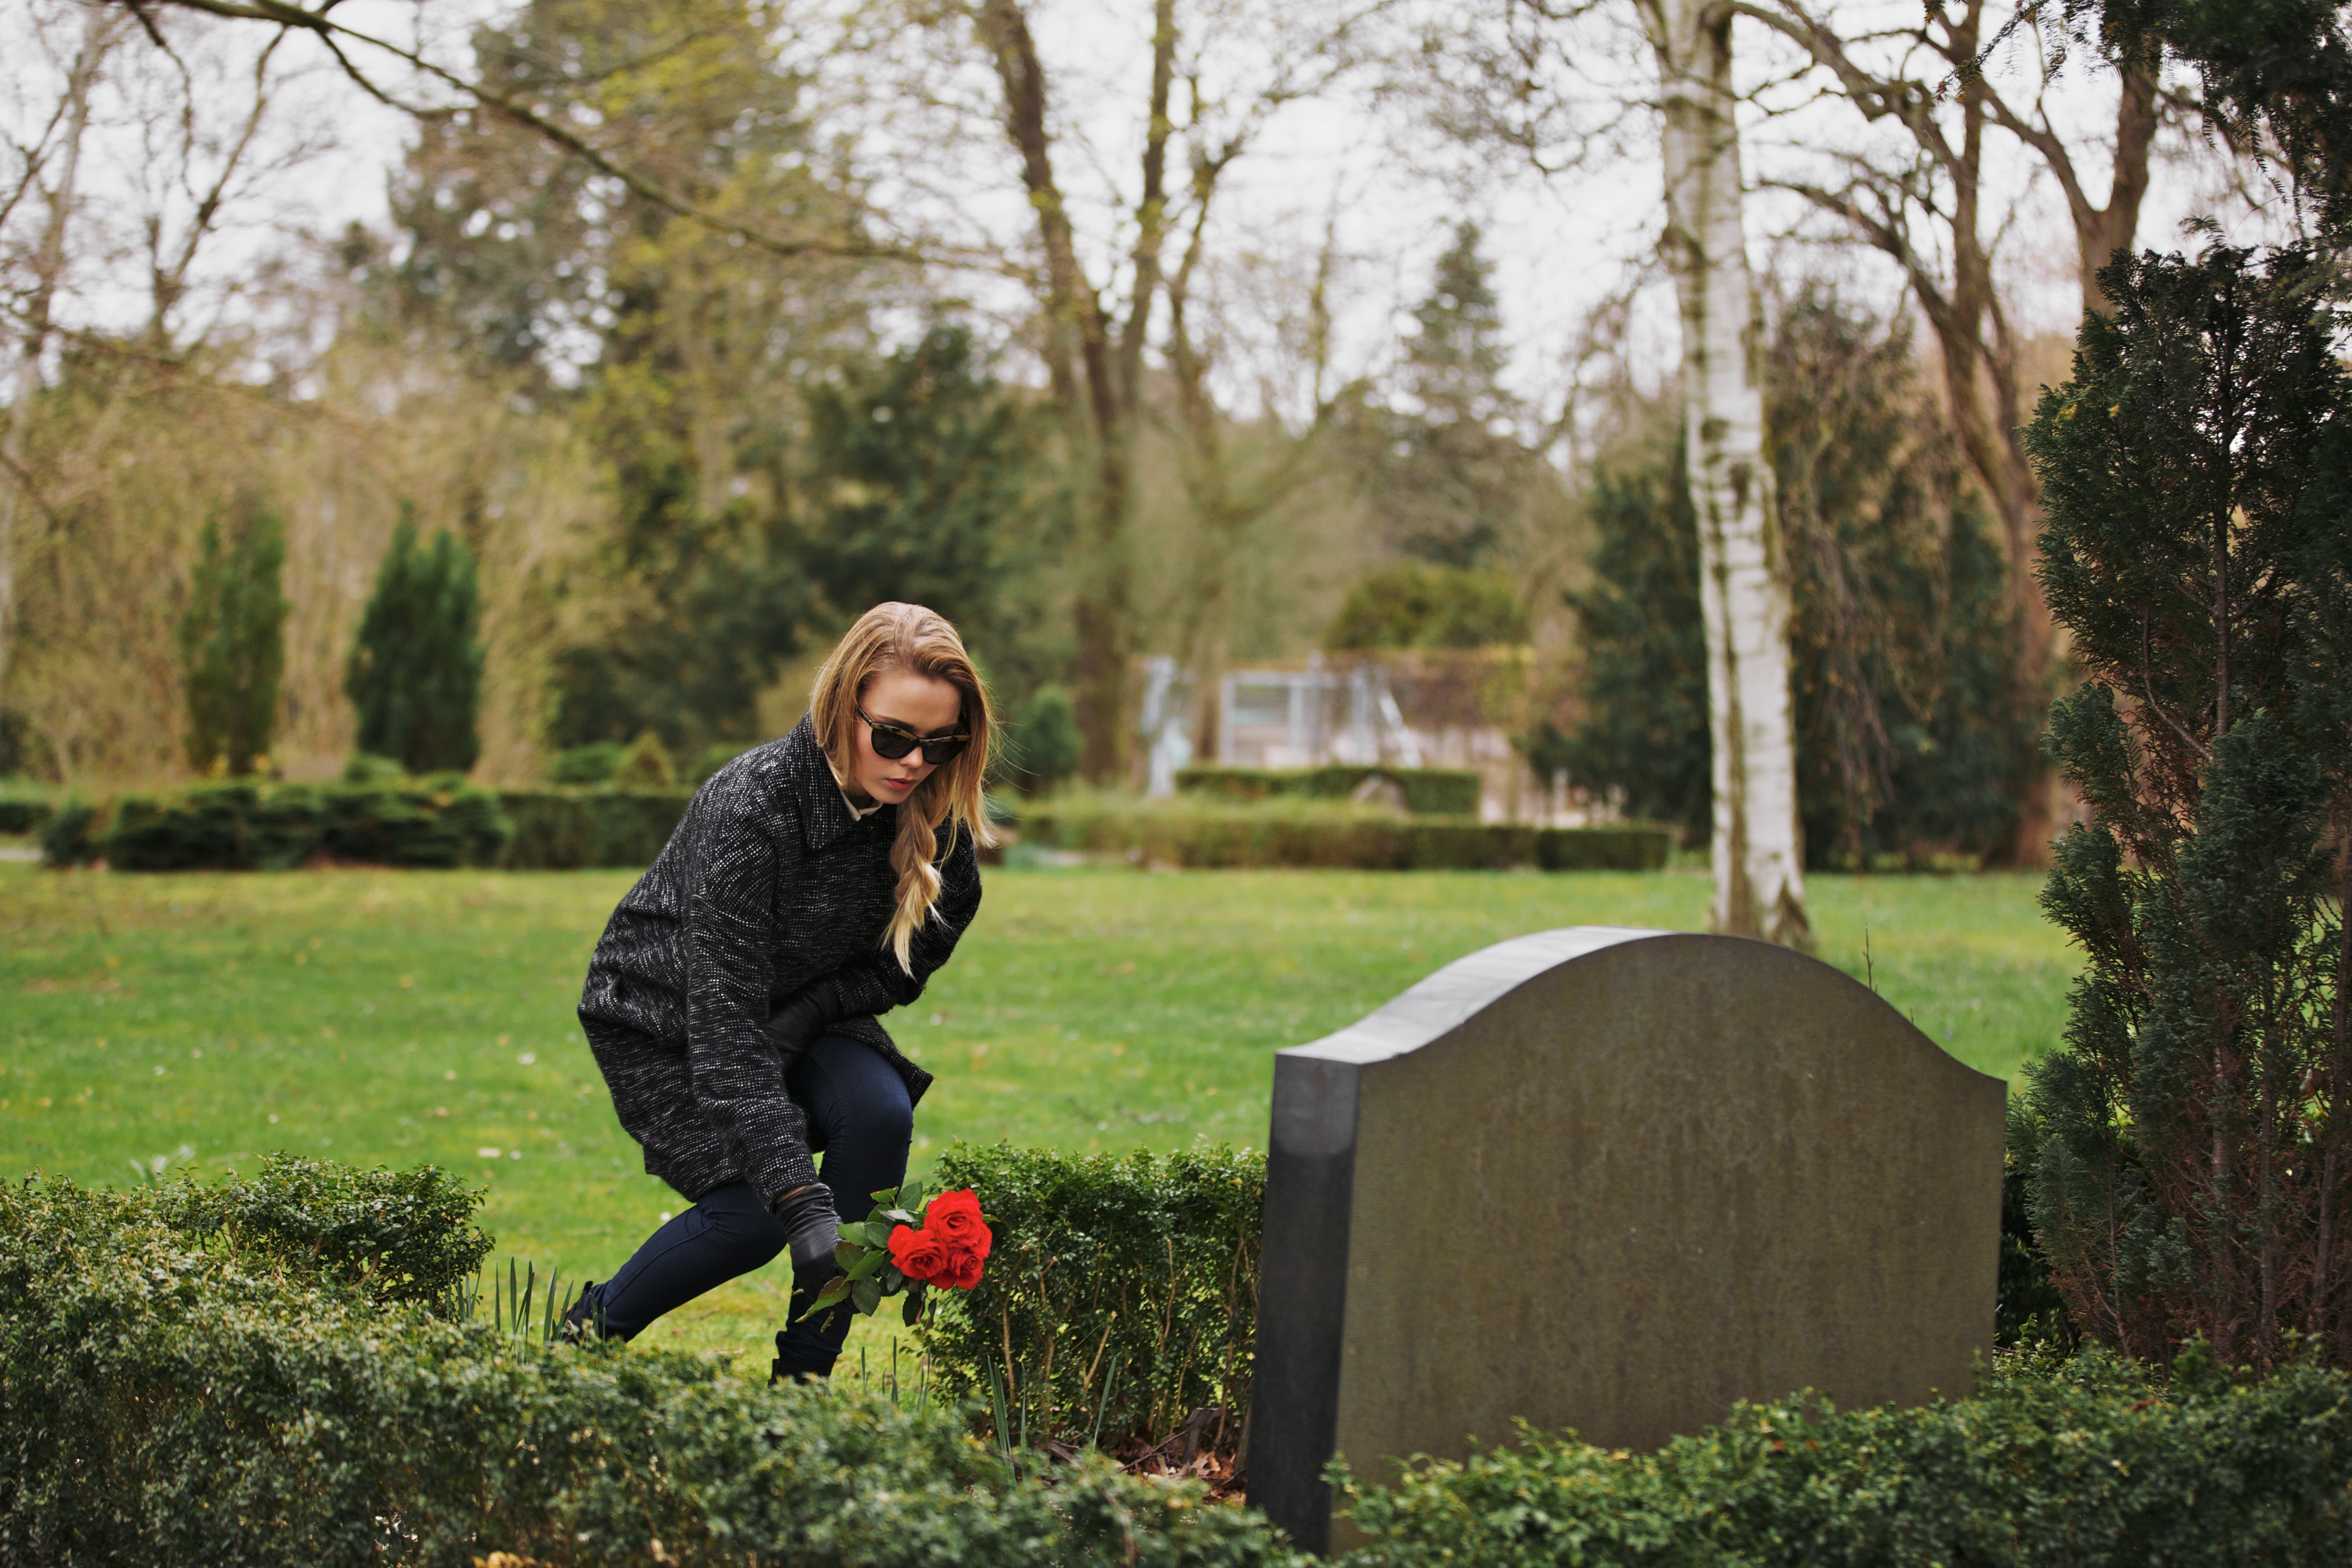 Young woman placing flowers on grave | Source: Shutterstock